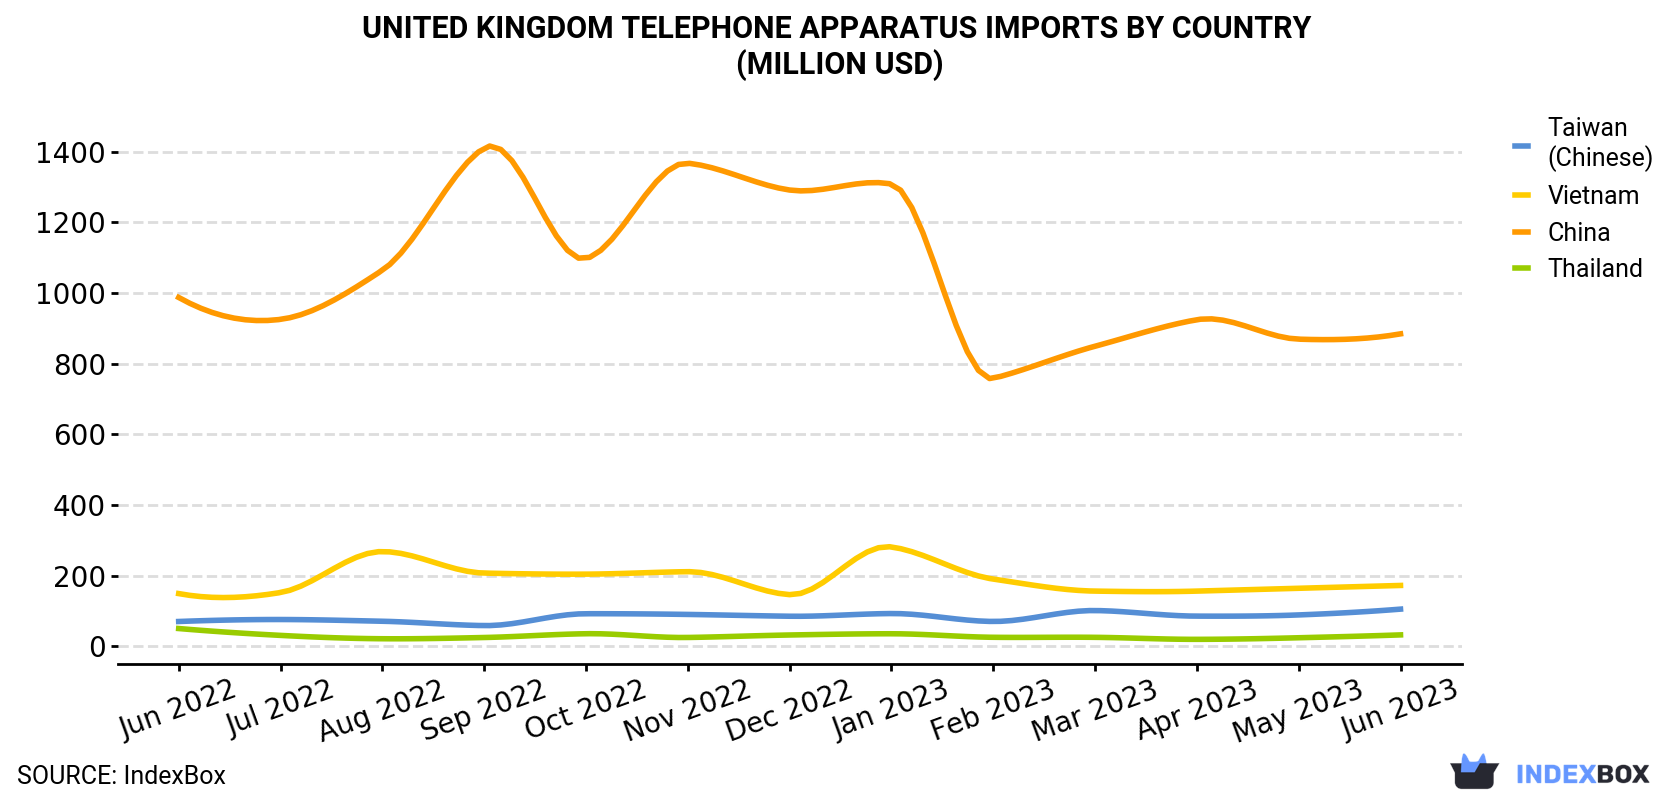 United Kingdom Telephone Apparatus Imports By Country (Million USD)